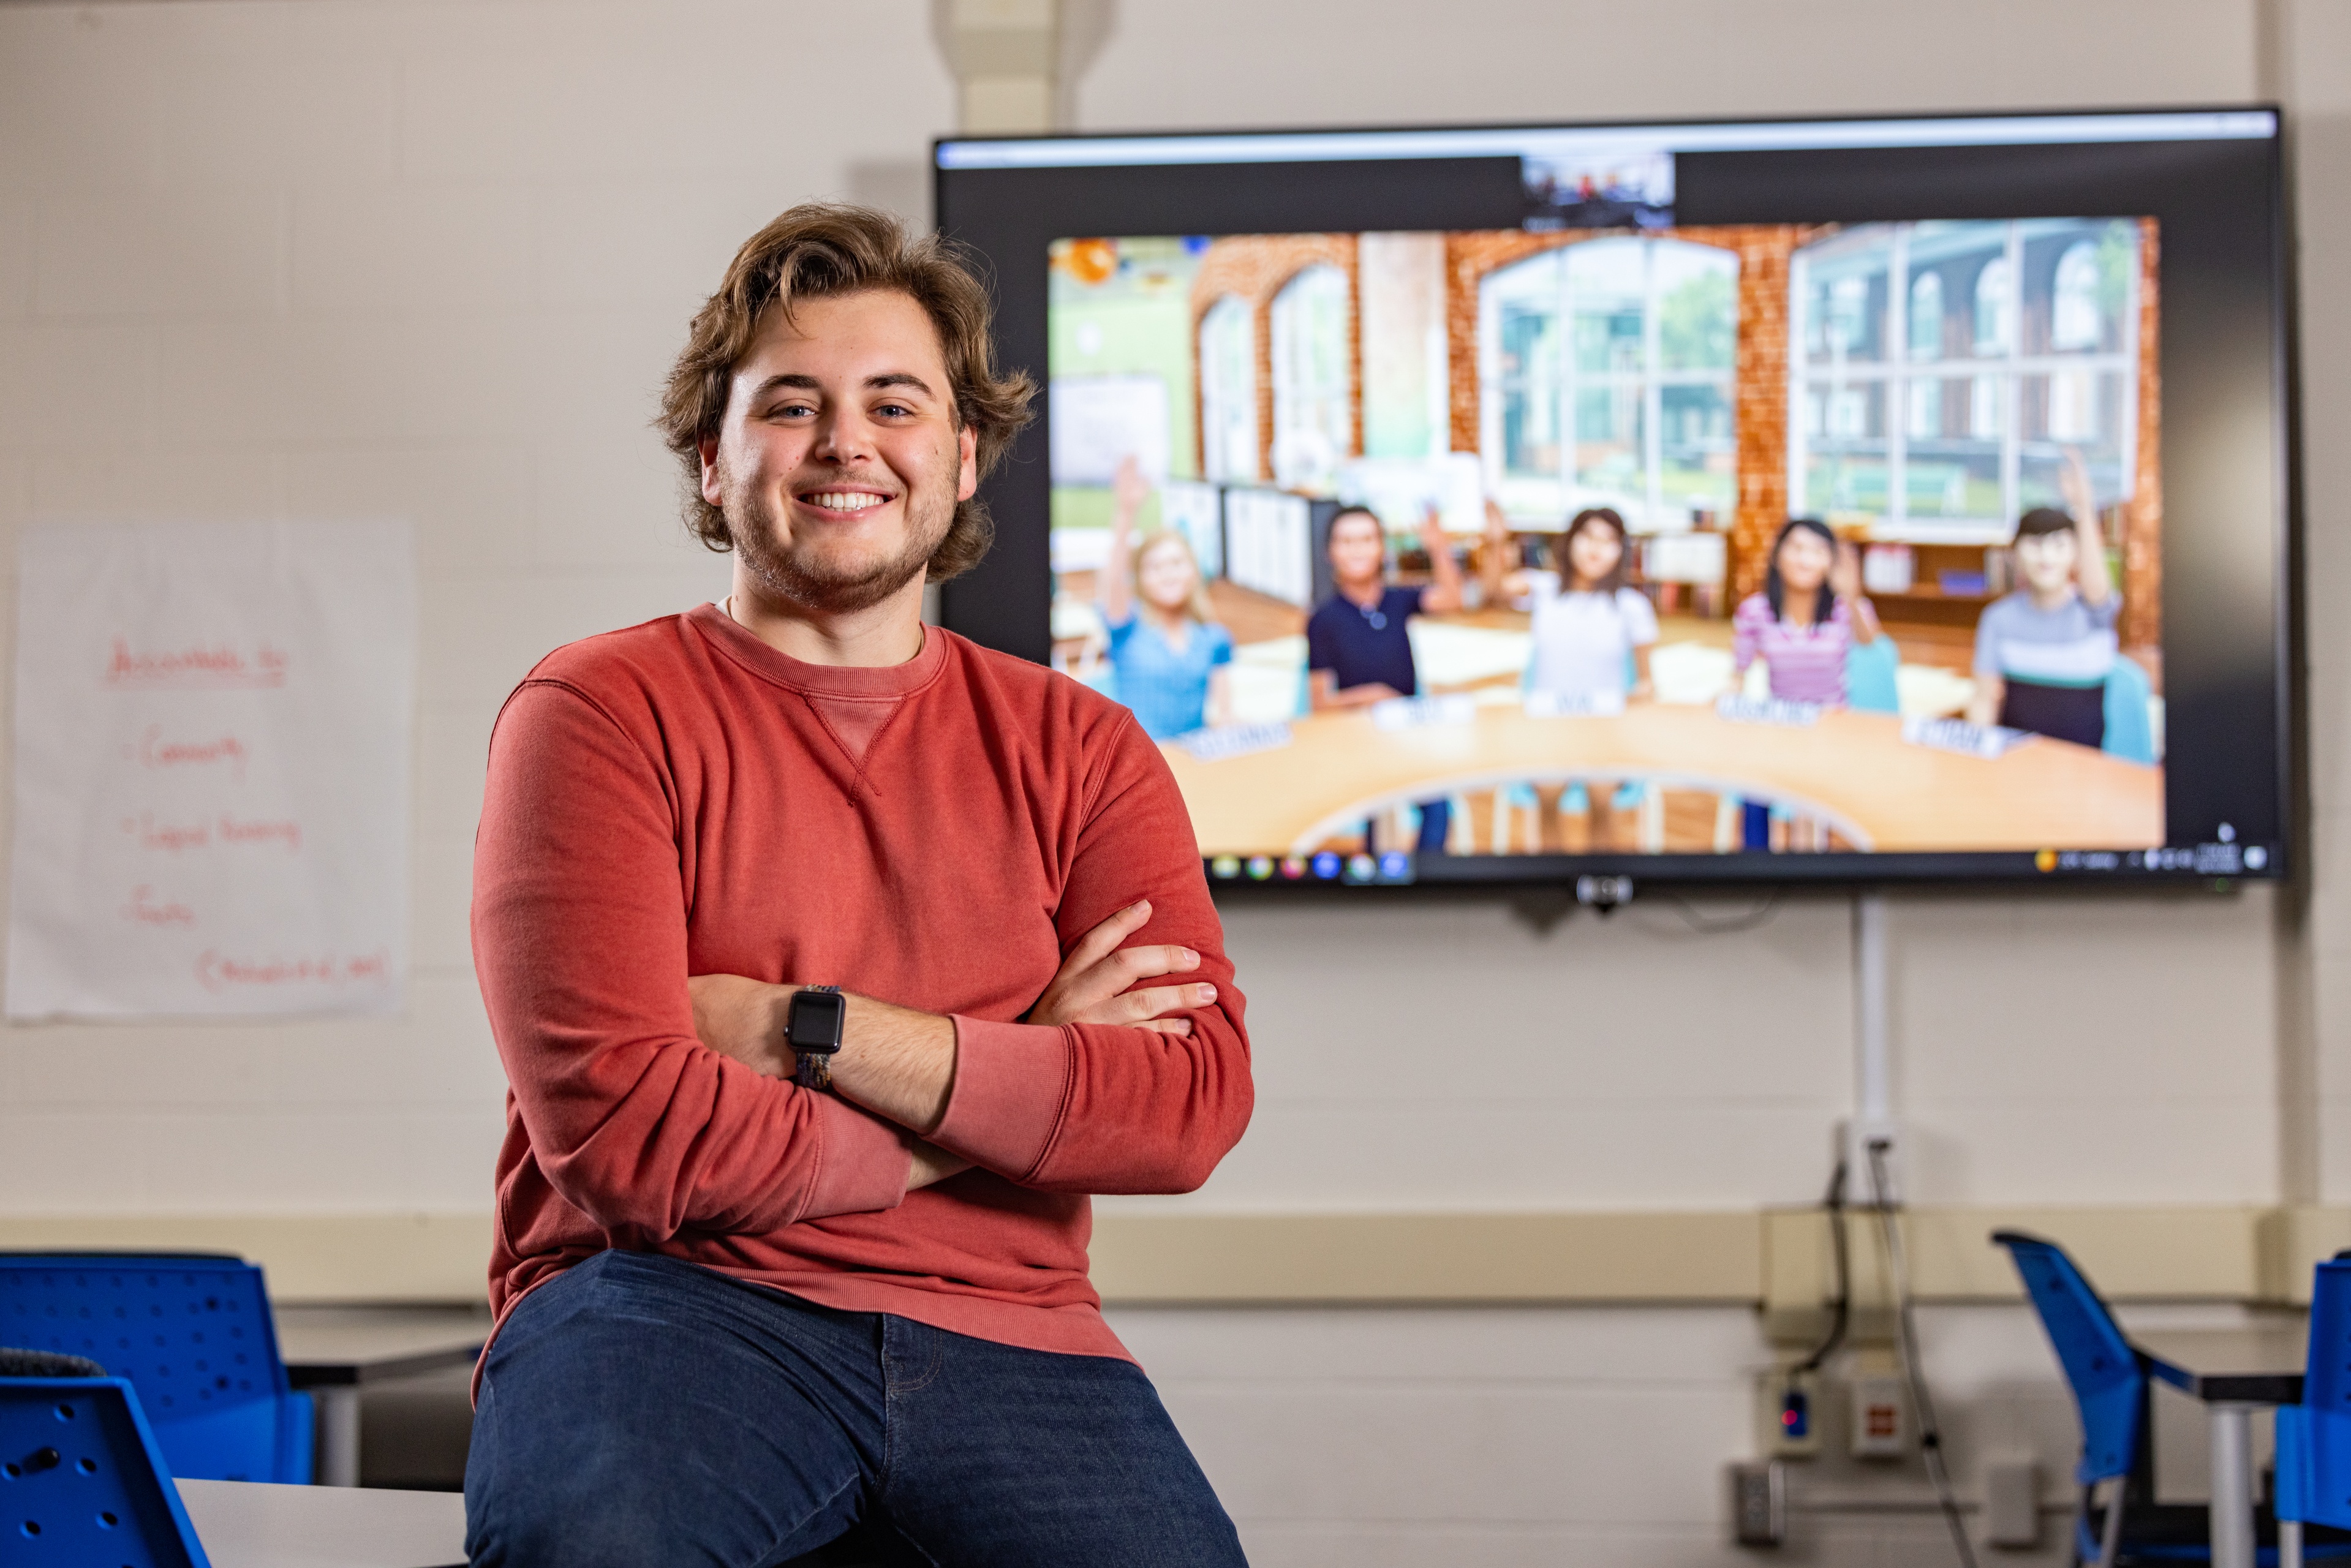 BGSU student smiles at the camera with a screen showing five simulated students in the Mursion display in the background.